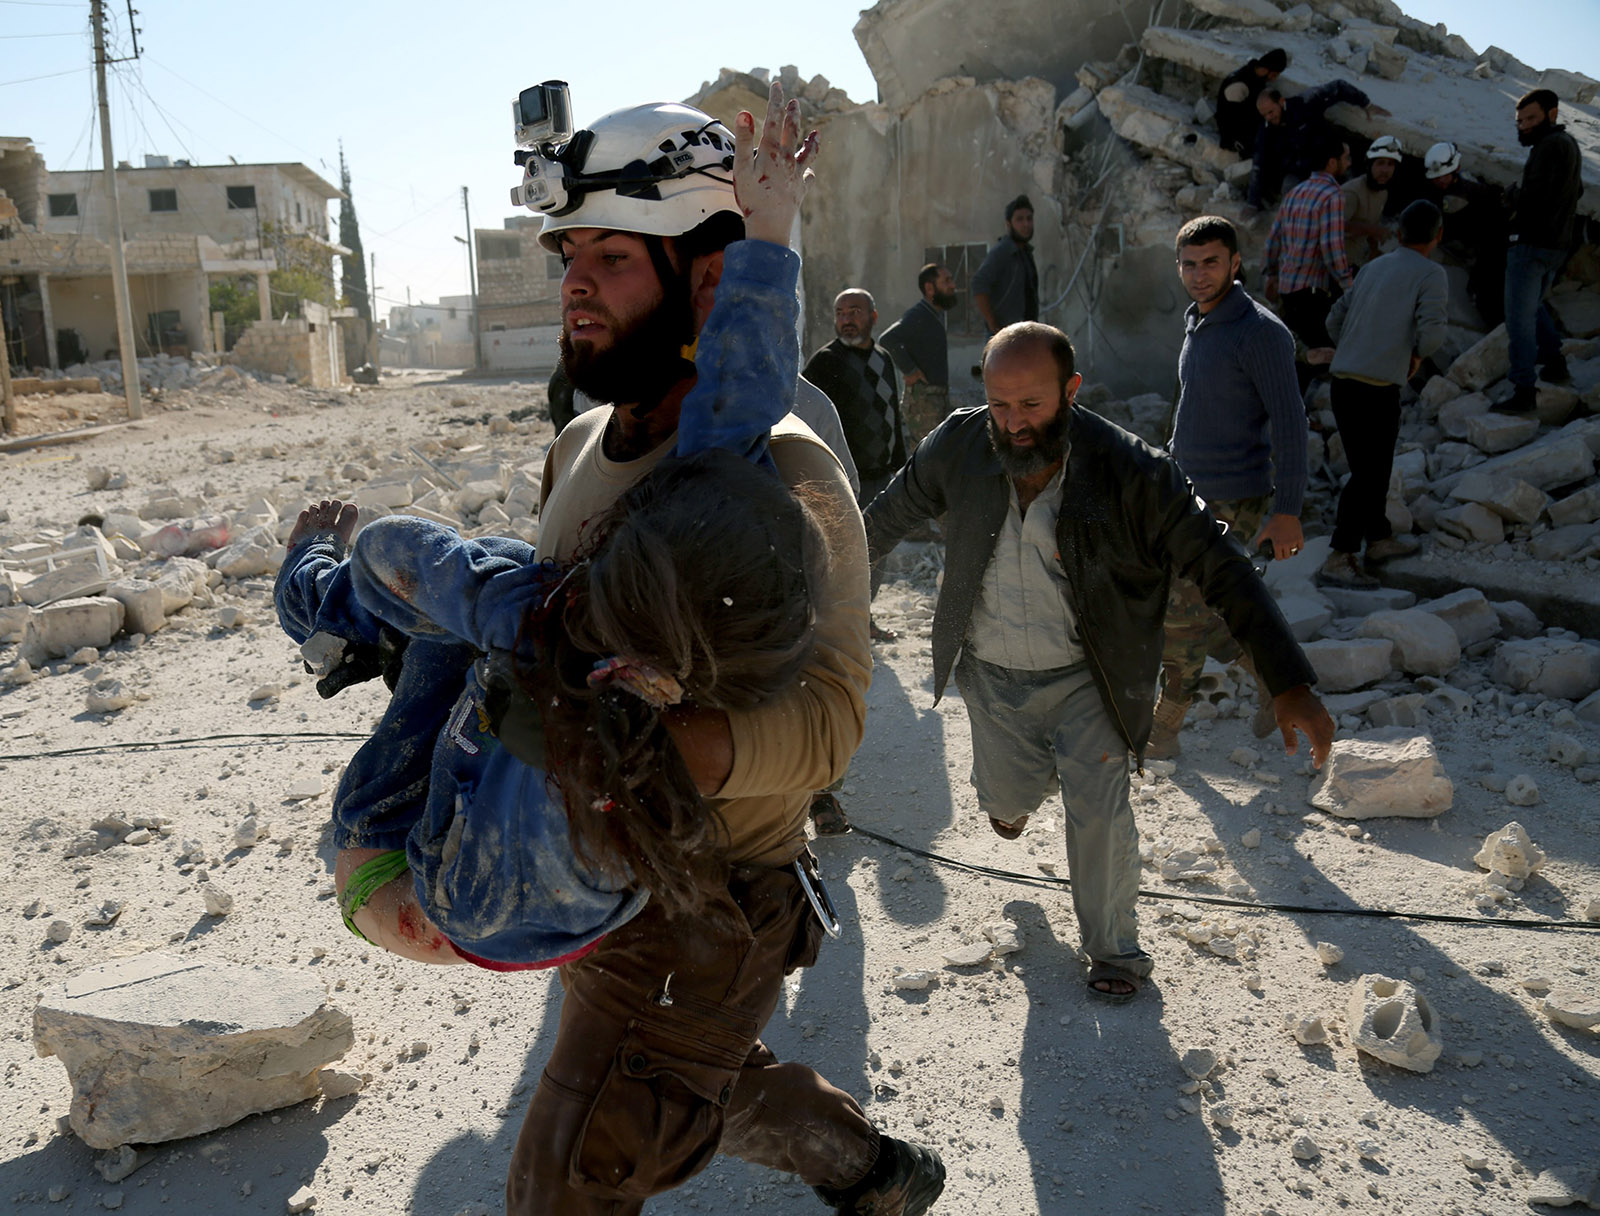 Why Assad and Russia Target the White Helmets